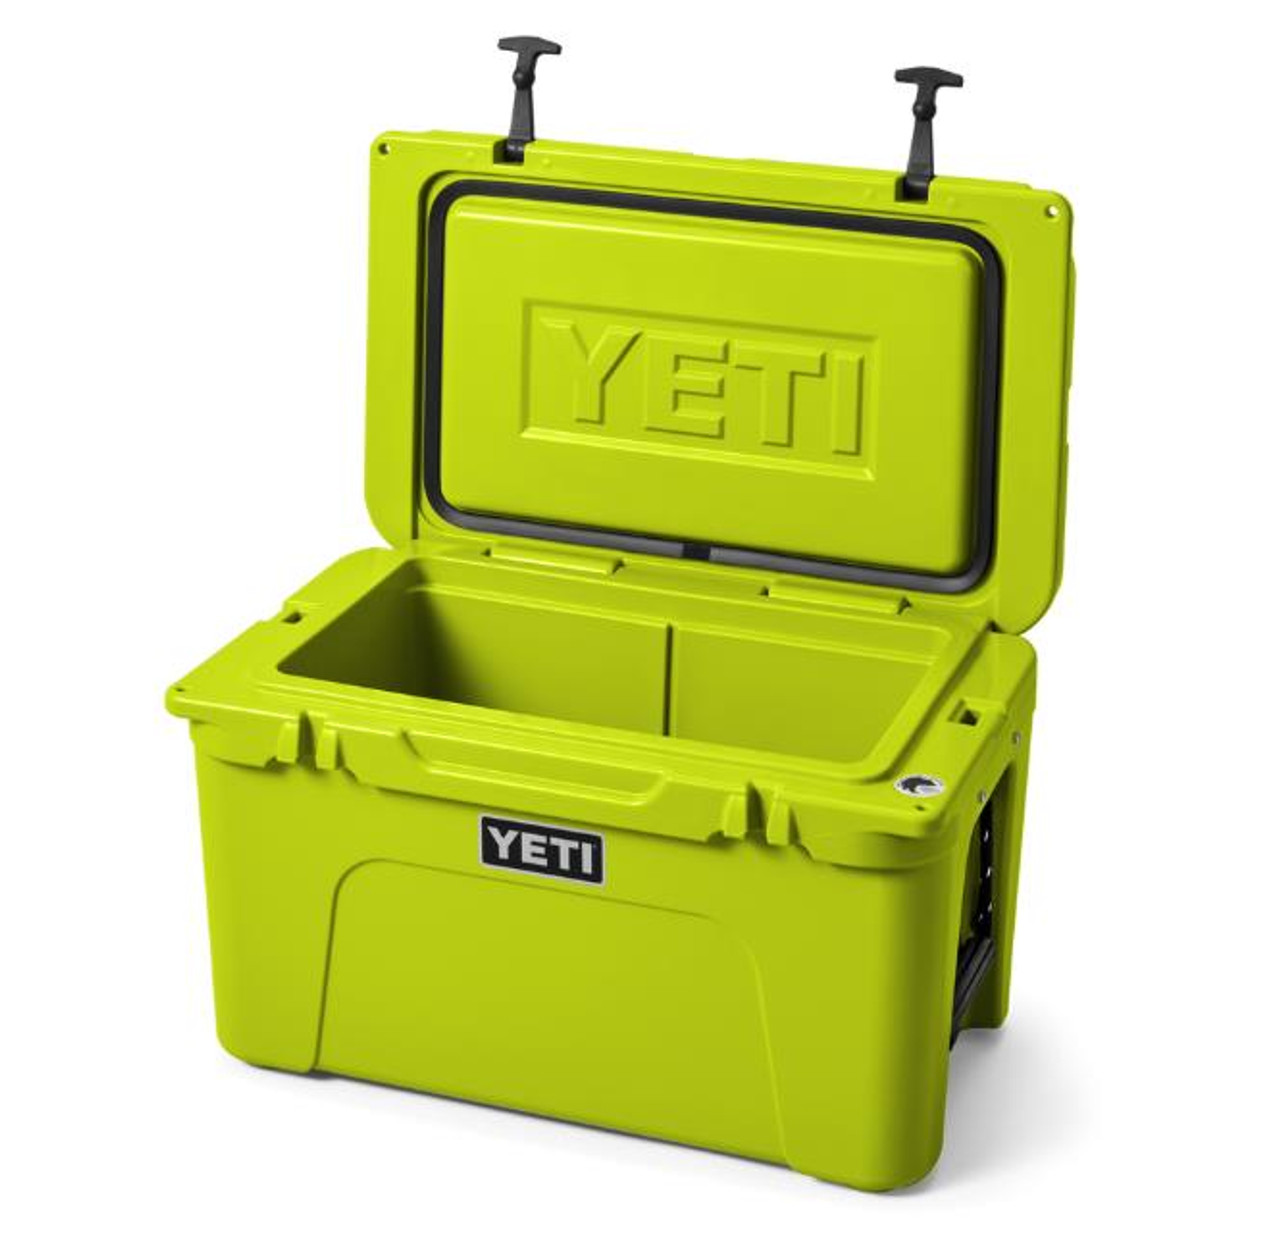 https://cdn11.bigcommerce.com/s-d4f5hm3/images/stencil/1280x1280/products/67238/171107/Yeti-Tundra-45-Chartreuse-888830082478_image1__59589.1703260638.jpg?c=2